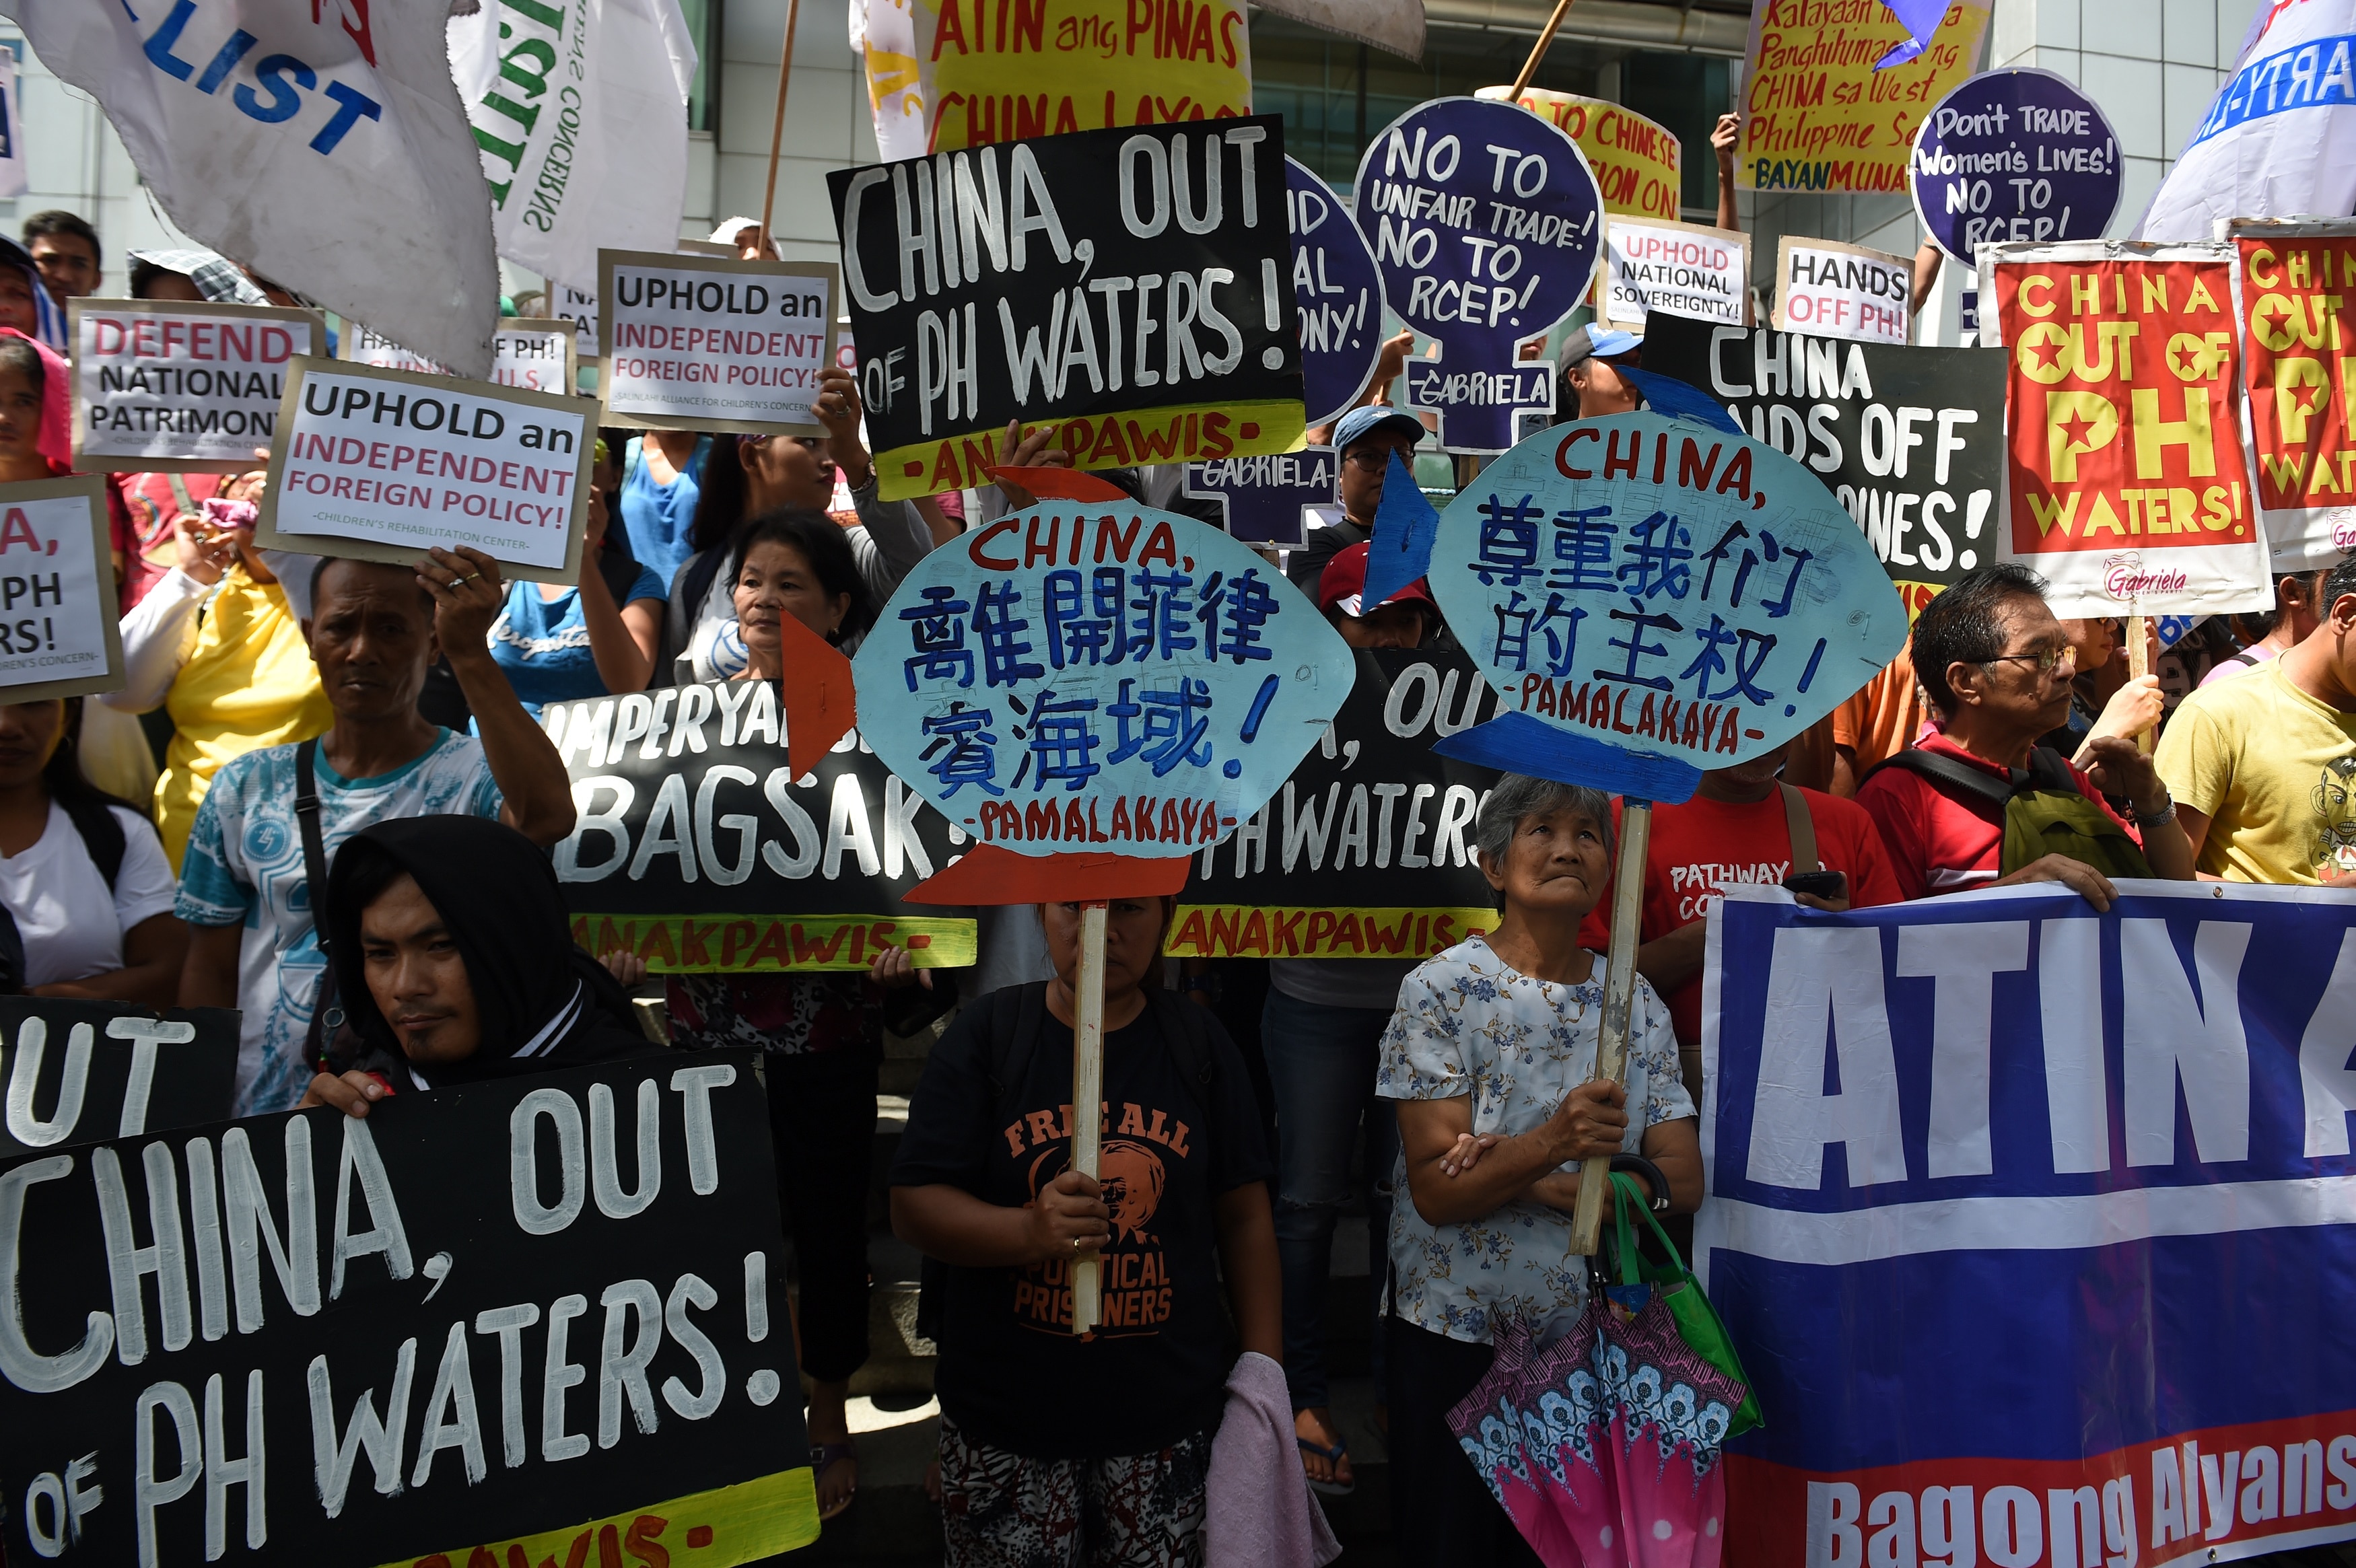 Protesters holding placards and streamers shout anti-China slogans during a protest against China's presence in disputed waters in the South China Sea.